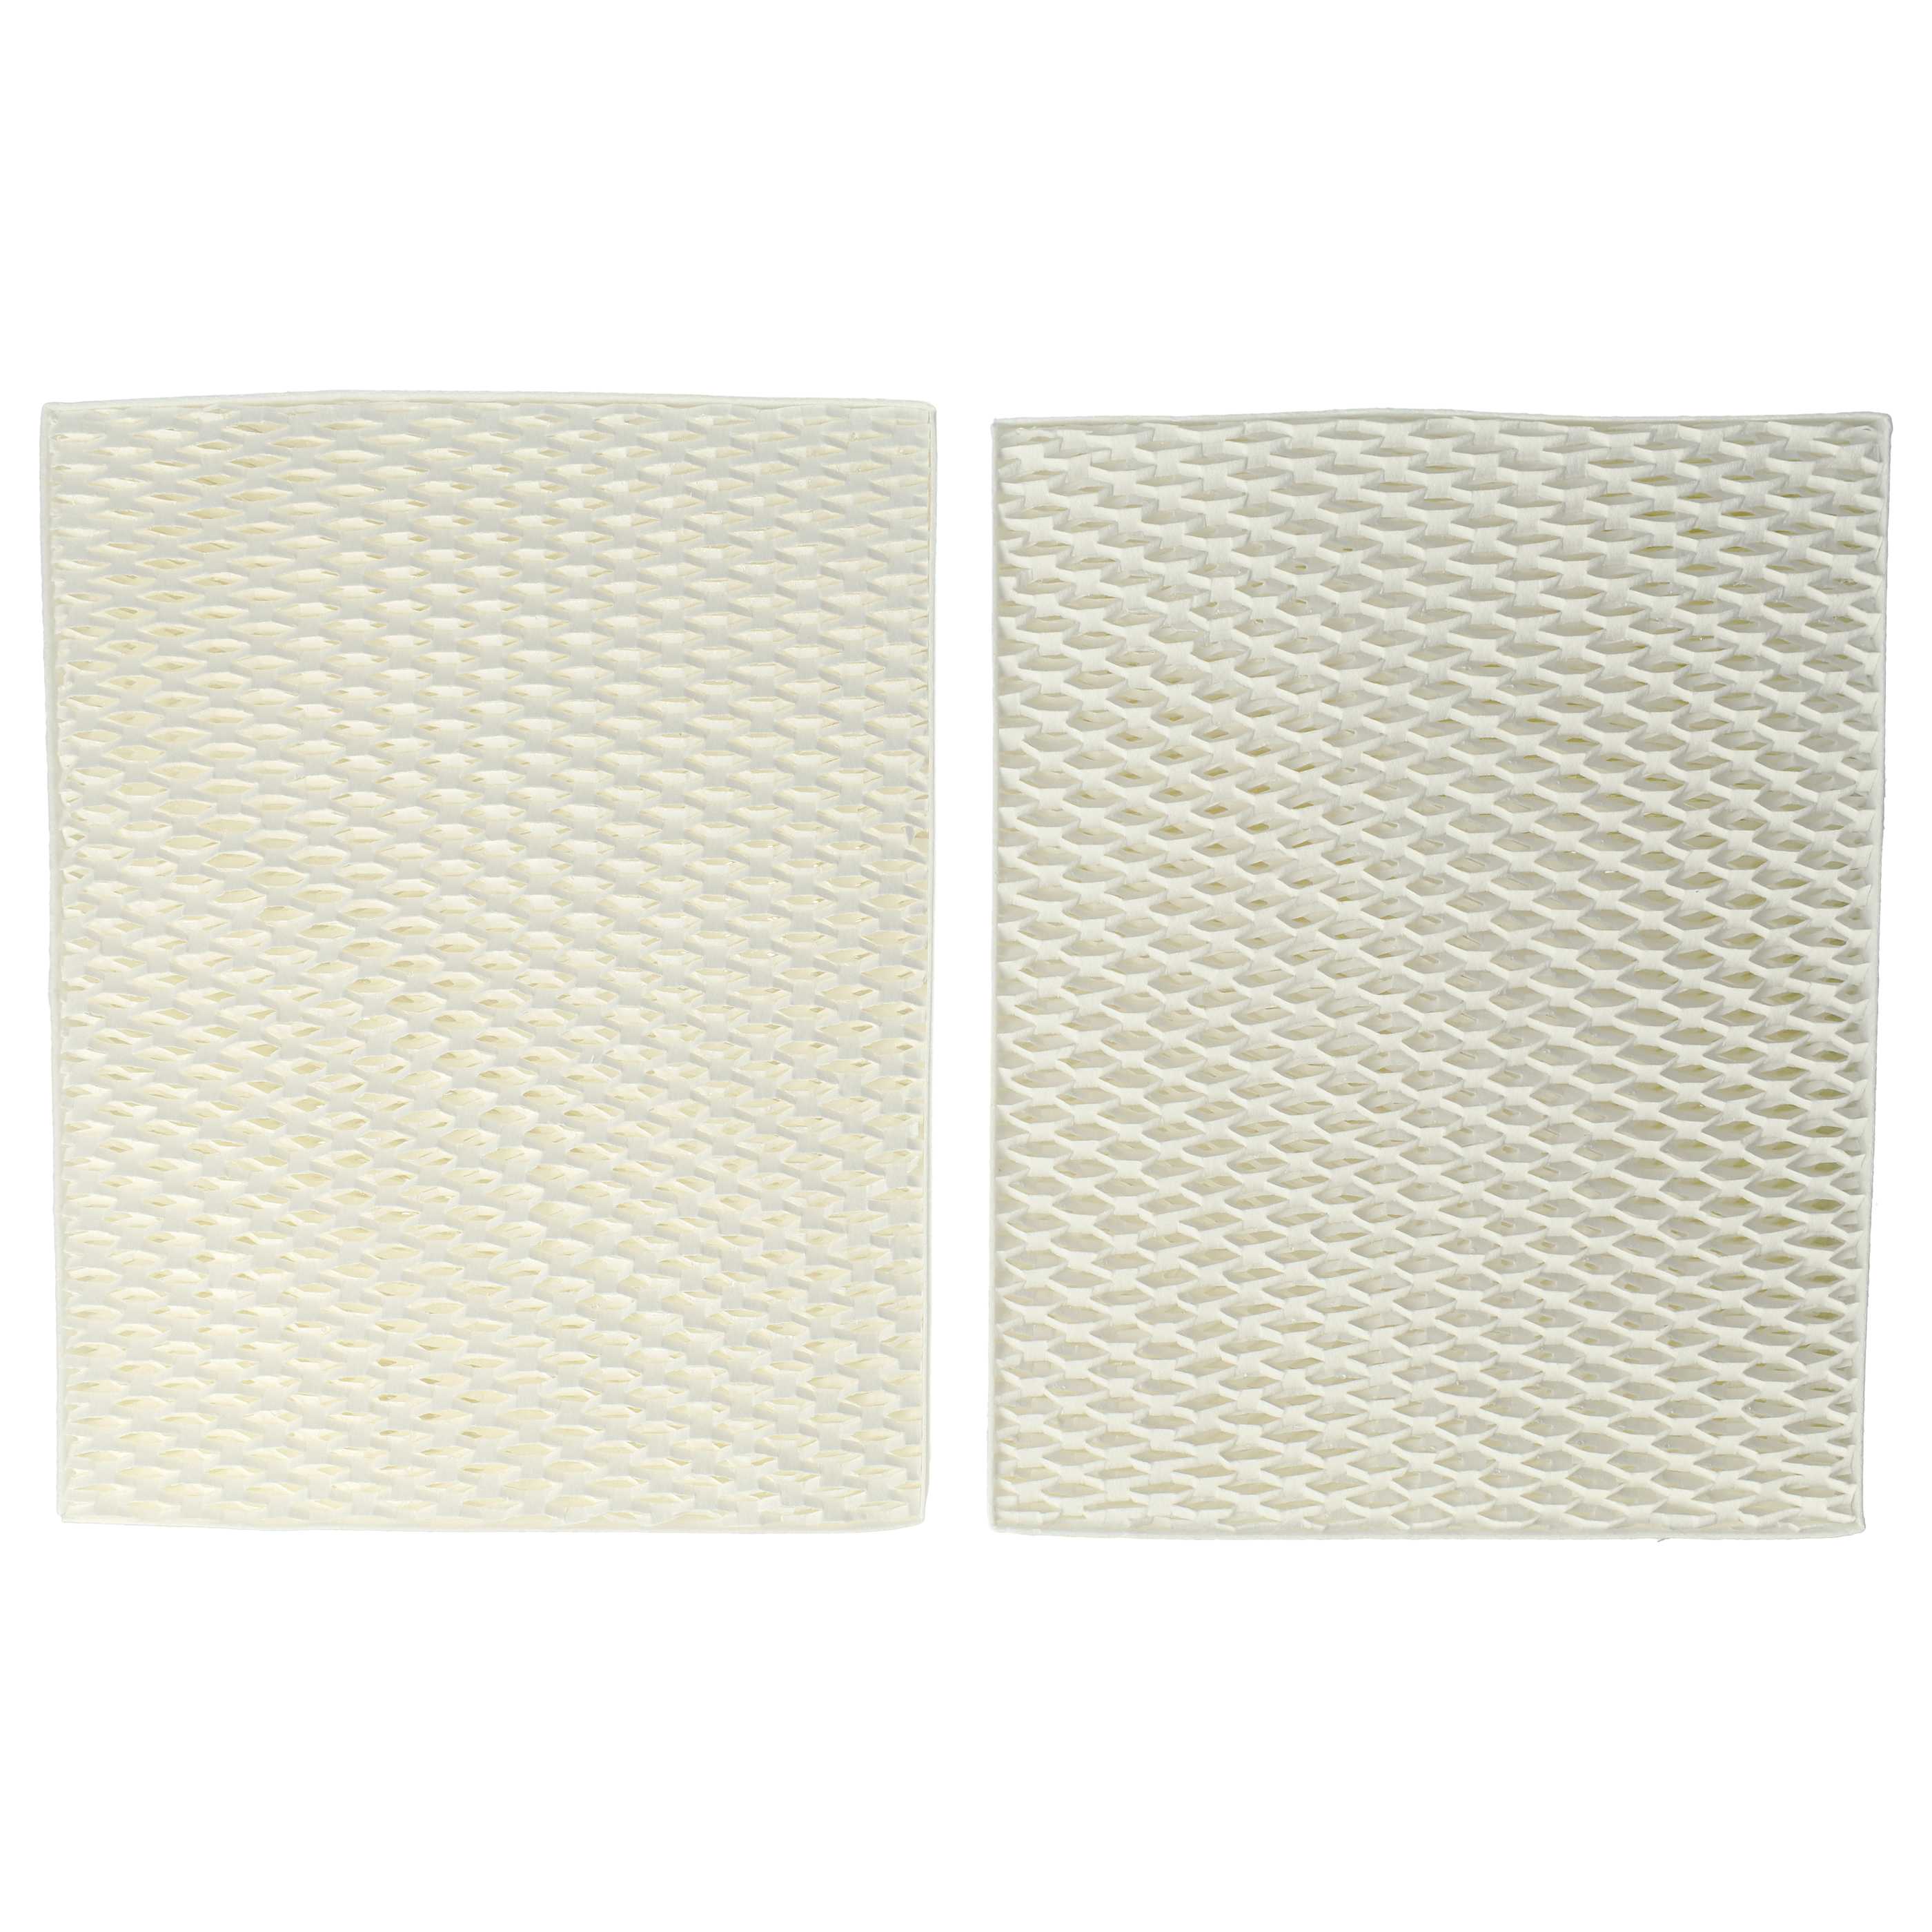 2x Filter replaces Stadler Form 10004, 14643/10 for Humidifier - paper